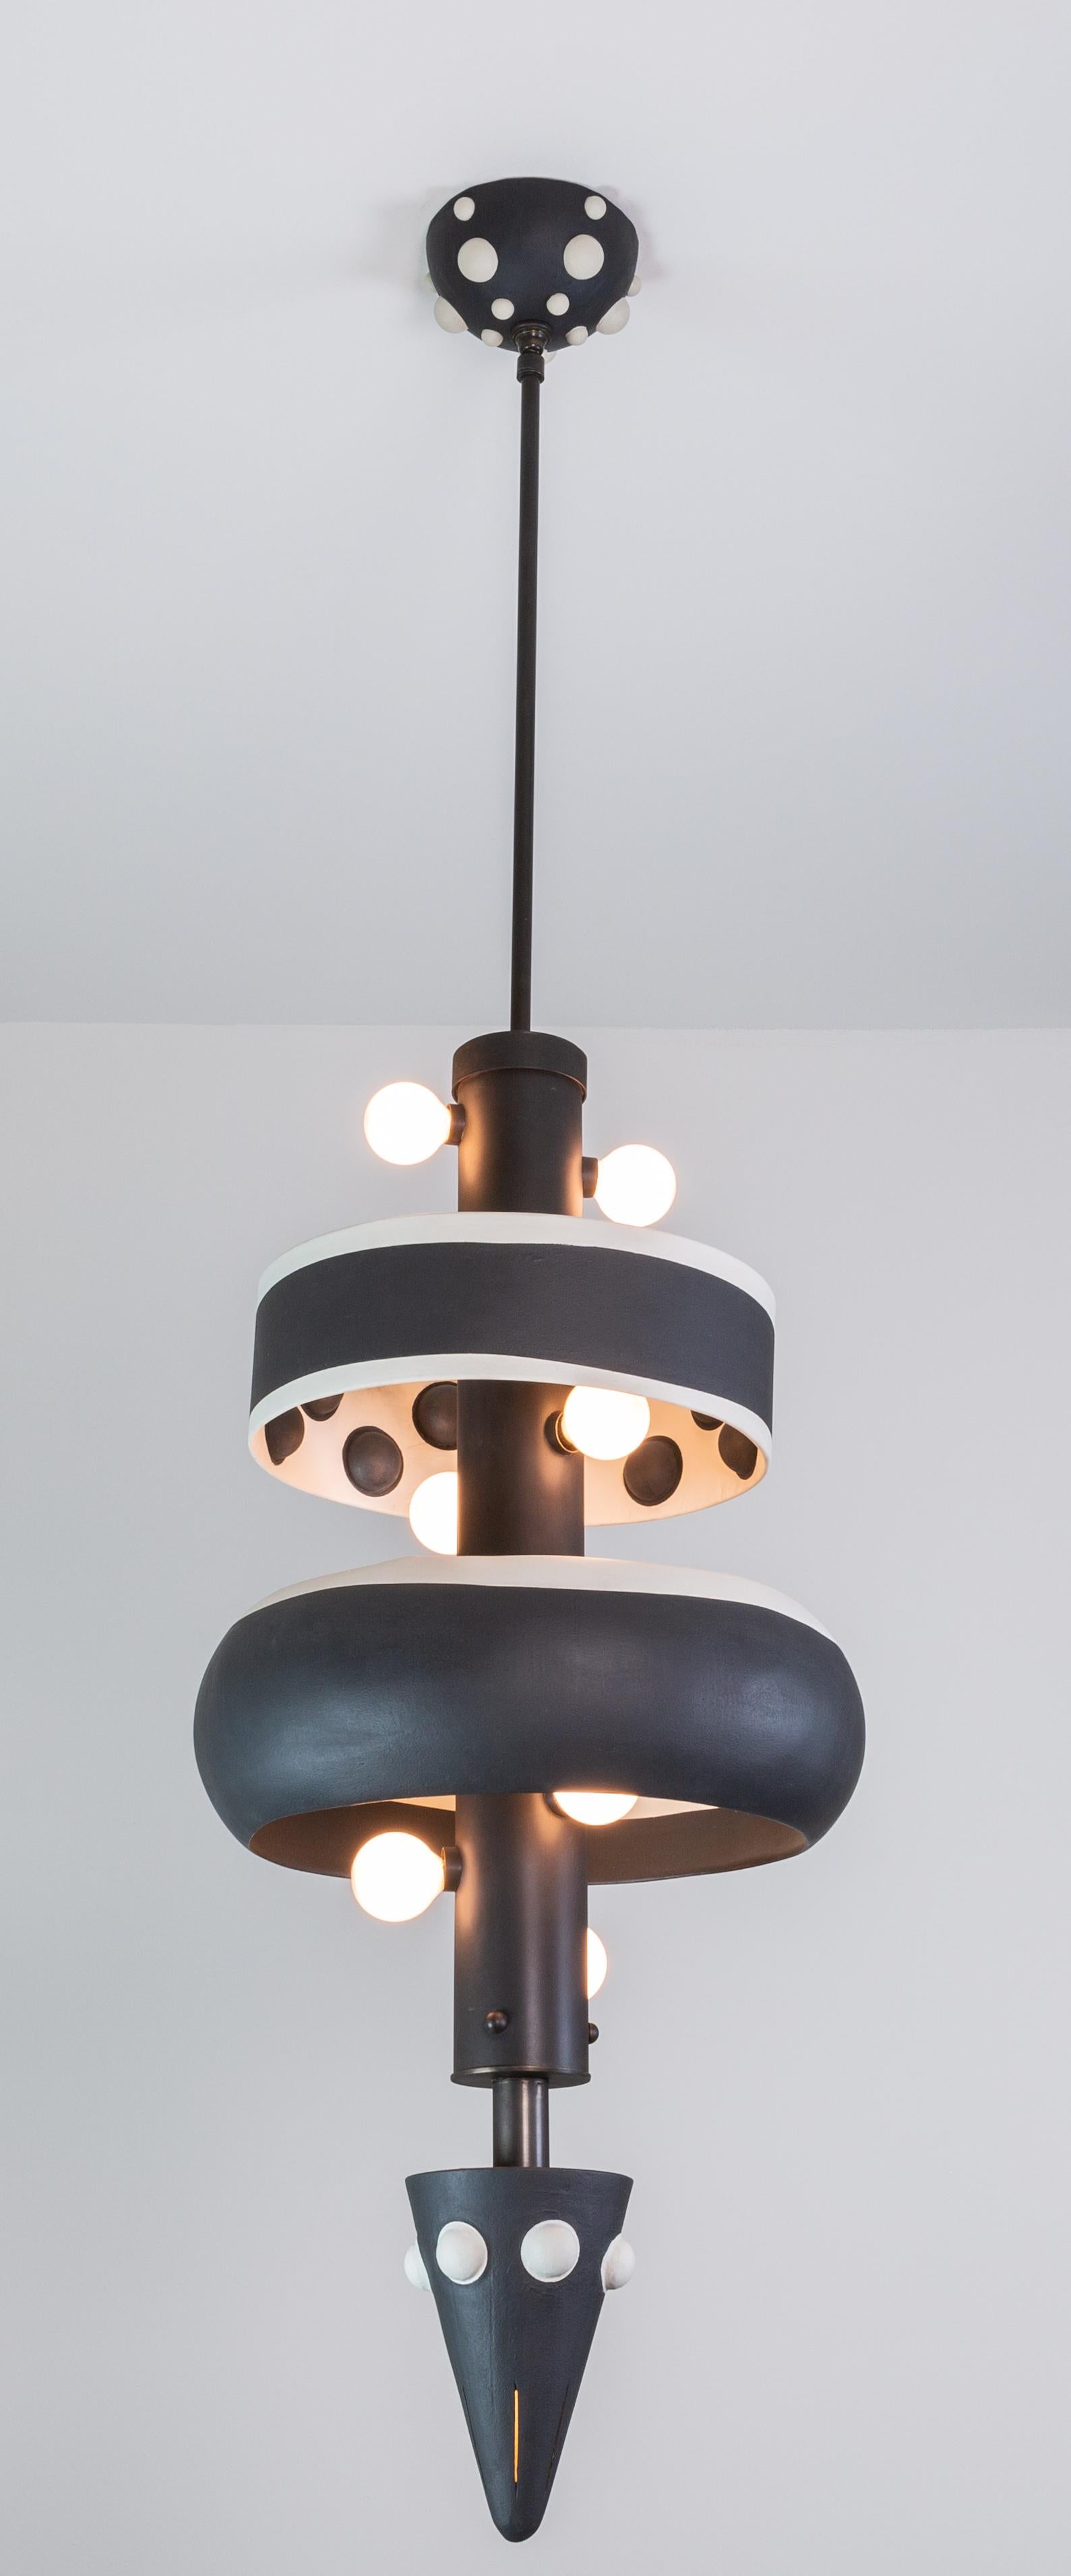 McKenzie is a pendant light, part of the Posse collection; a system designed around the core ideas of collaboration and play.

The pendant is created to give the customer freedom in tailoring their own expression. The design is centered around a